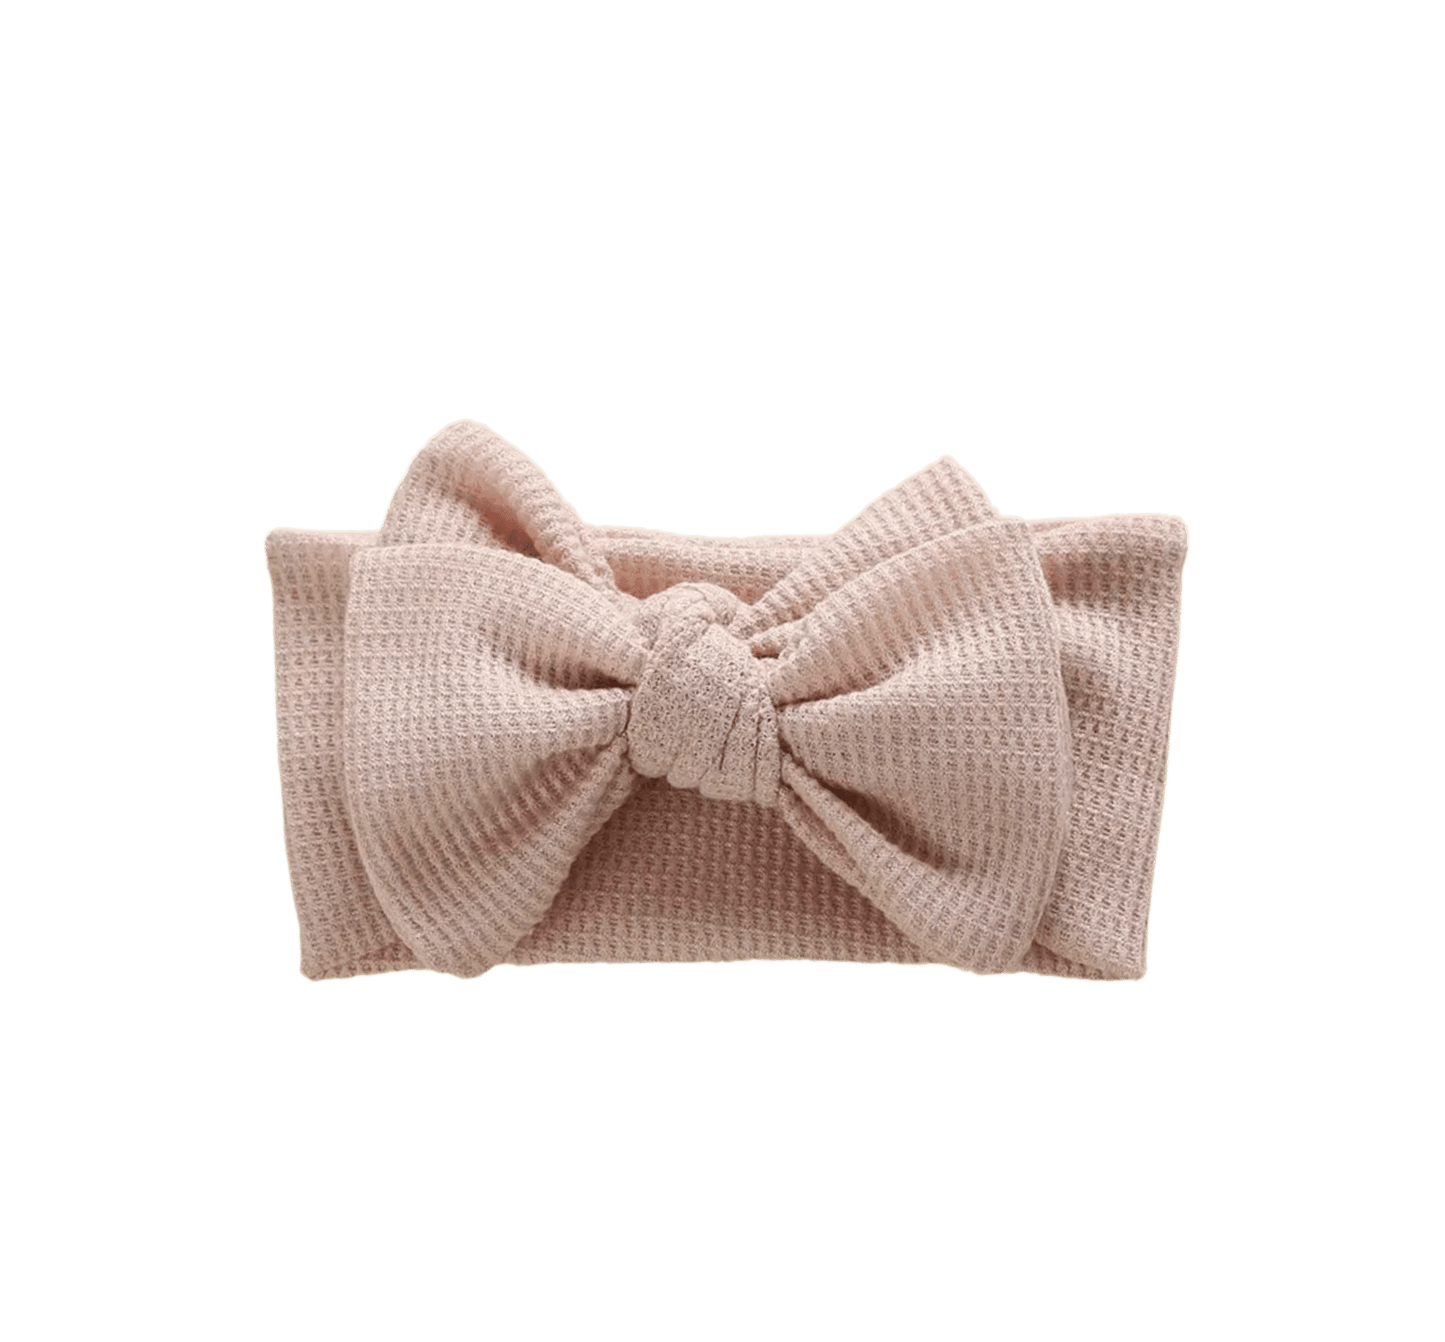 Chic waffle knit bow headwrap in light sandy pink - adorable baby girl accessory by Bowy Lou